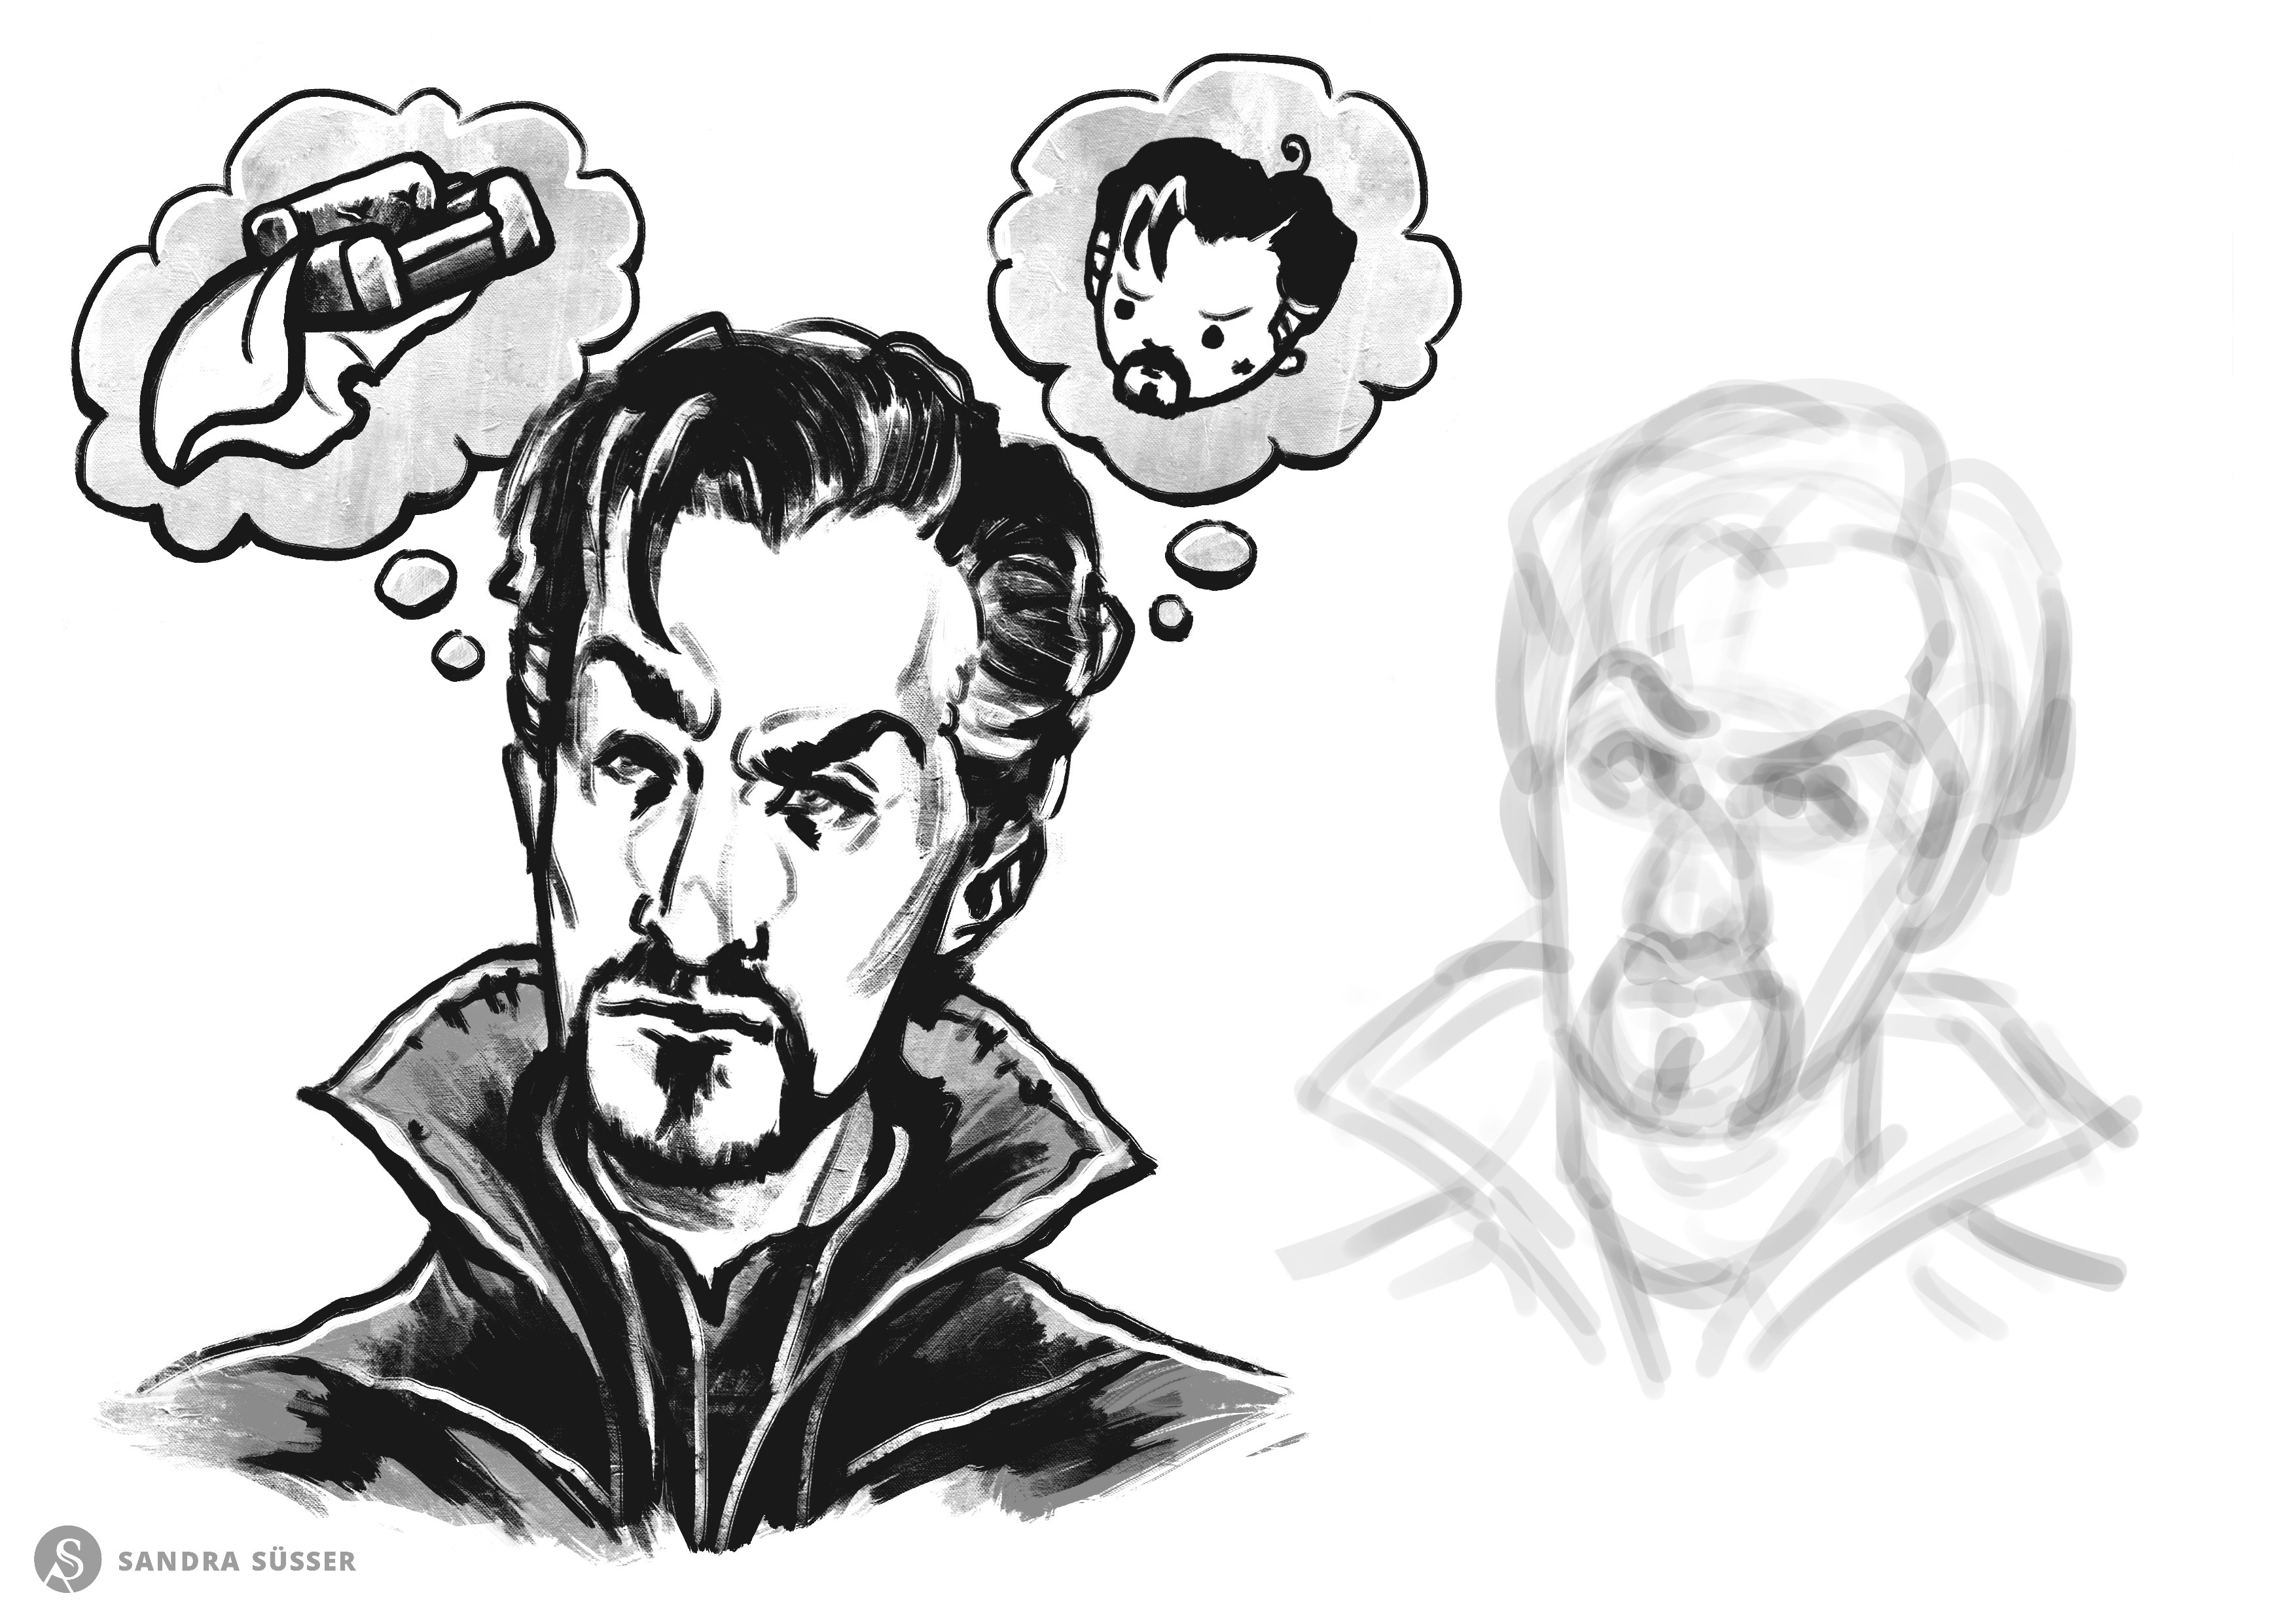 PART 4 - "What if Doctor Strange... travelled too fast through time?" a.k.a. Marvel x Hitchhiker's Guide to the Galaxy Crossover